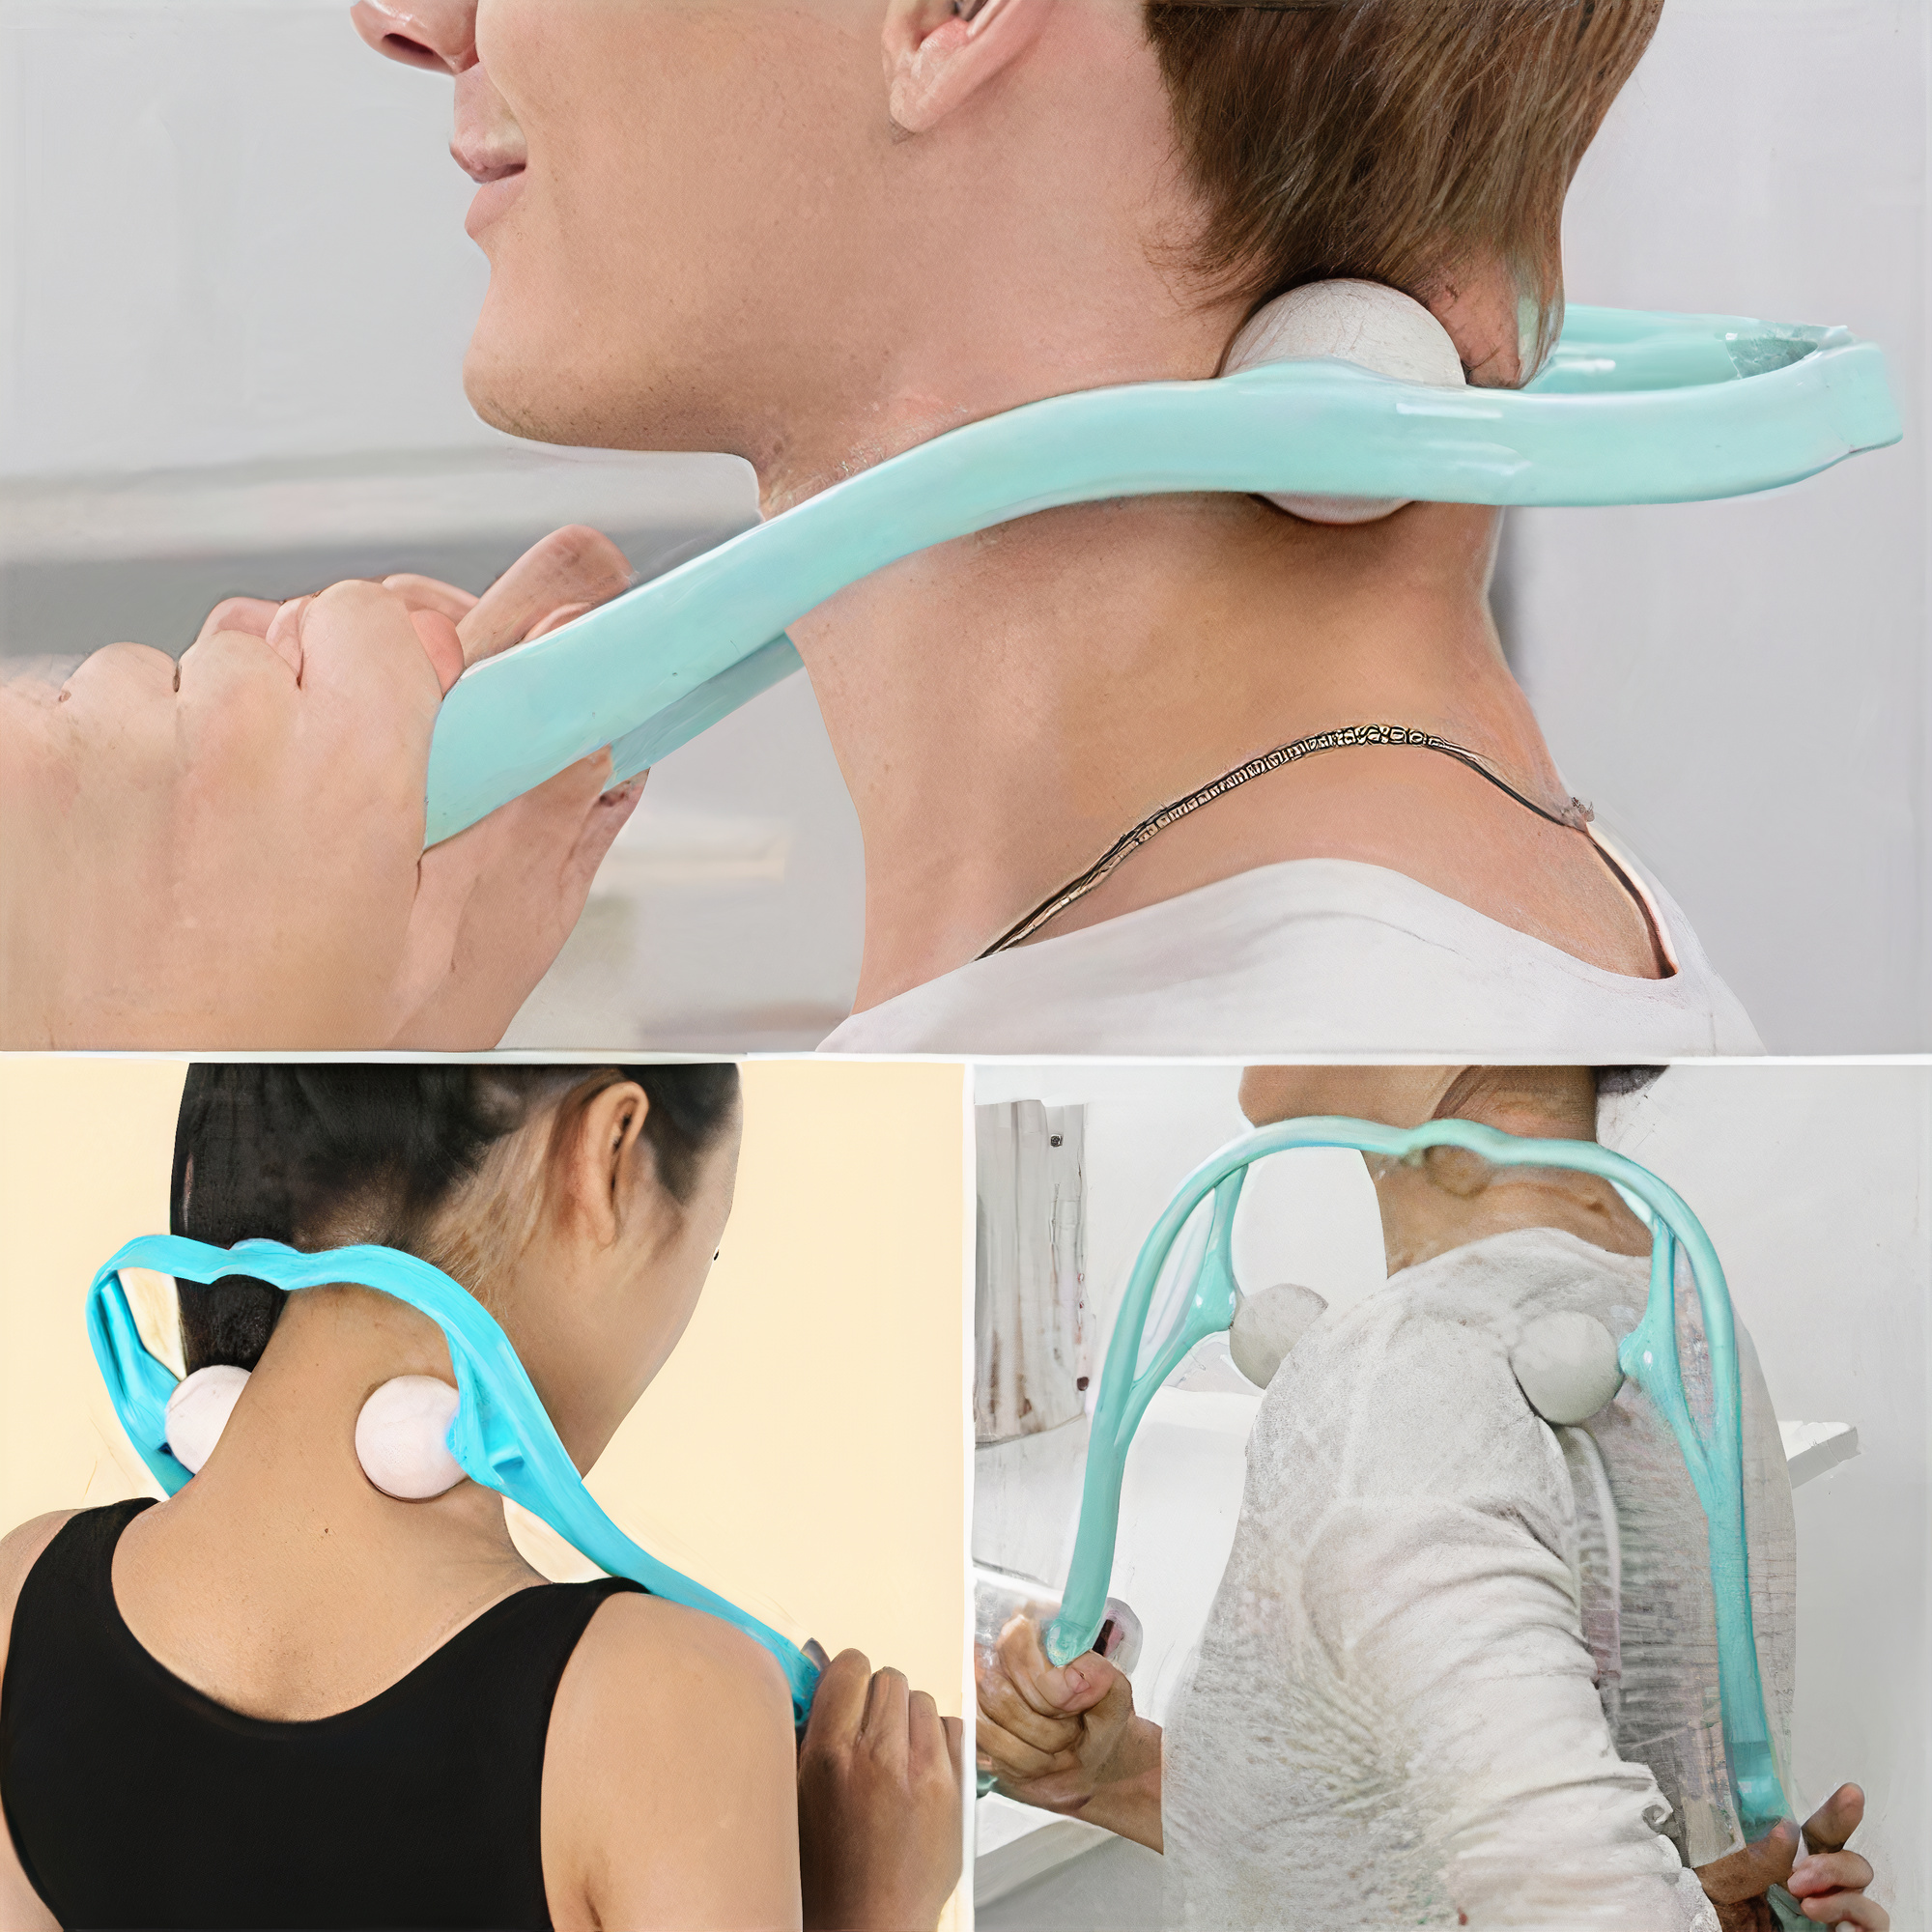 WowObjects-1Pc-Neck-Massager-For-SDL950983108-1-d54df_auto_x2